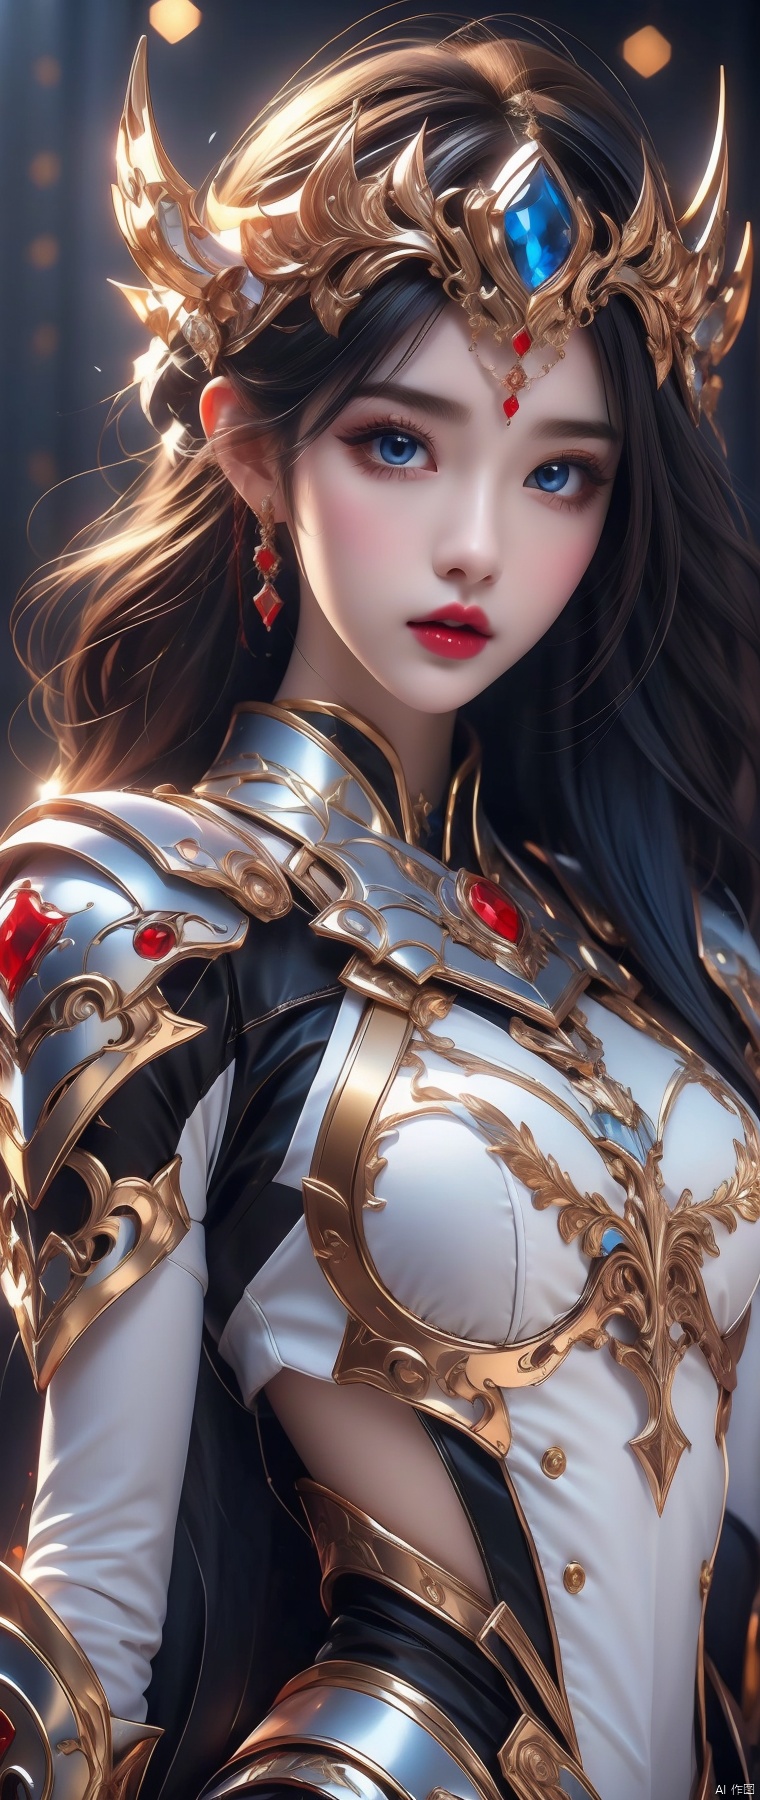  4k, office art,1girl with white armor,decorated with complex patterns and exquisite lines, k-pop, blue eyes, dark red lips,